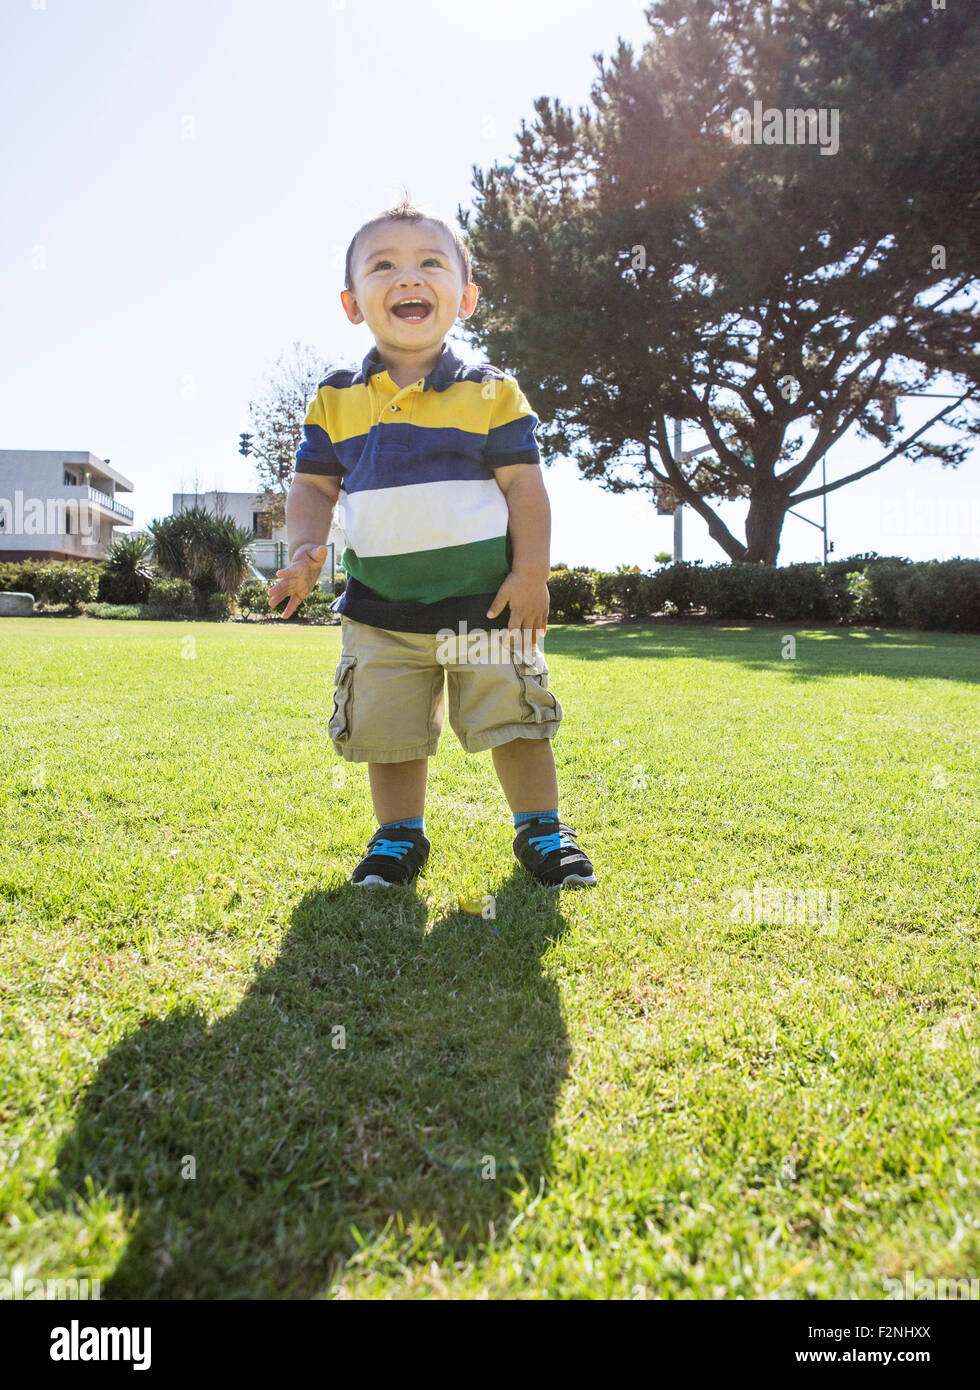 Hispanic boy standing on grass in park Banque D'Images